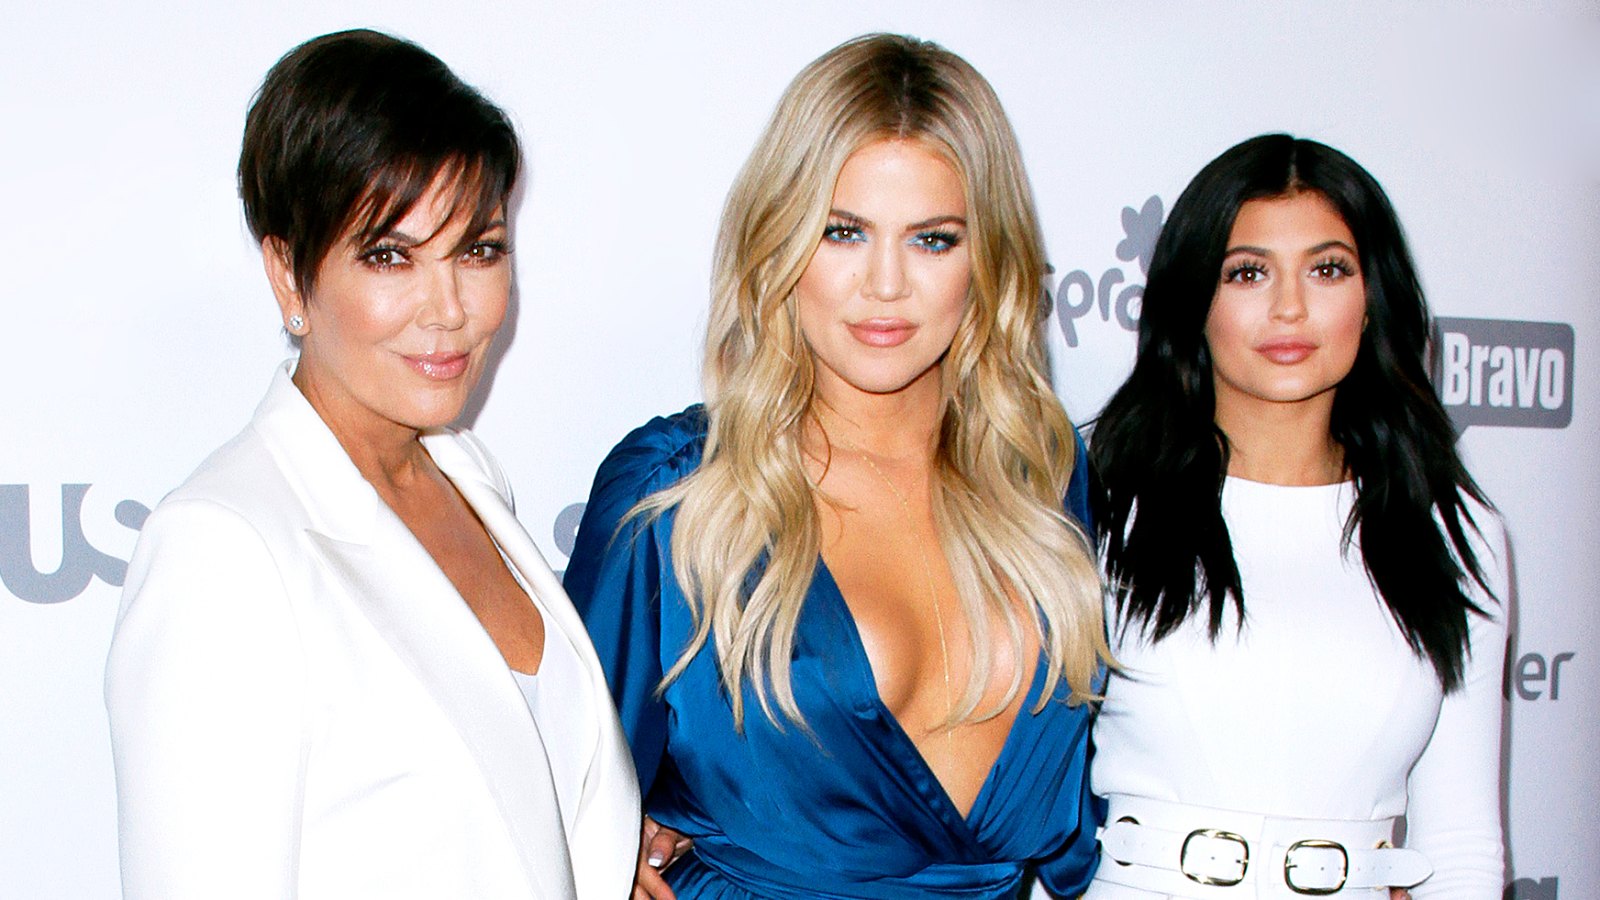 Kris Jenner, Khloe Kardashian and Kylie Jenner attend the 2015 NBCUniversal Cable Entertainment Upfront at The Jacob K. Javits Convention Center in New York City.